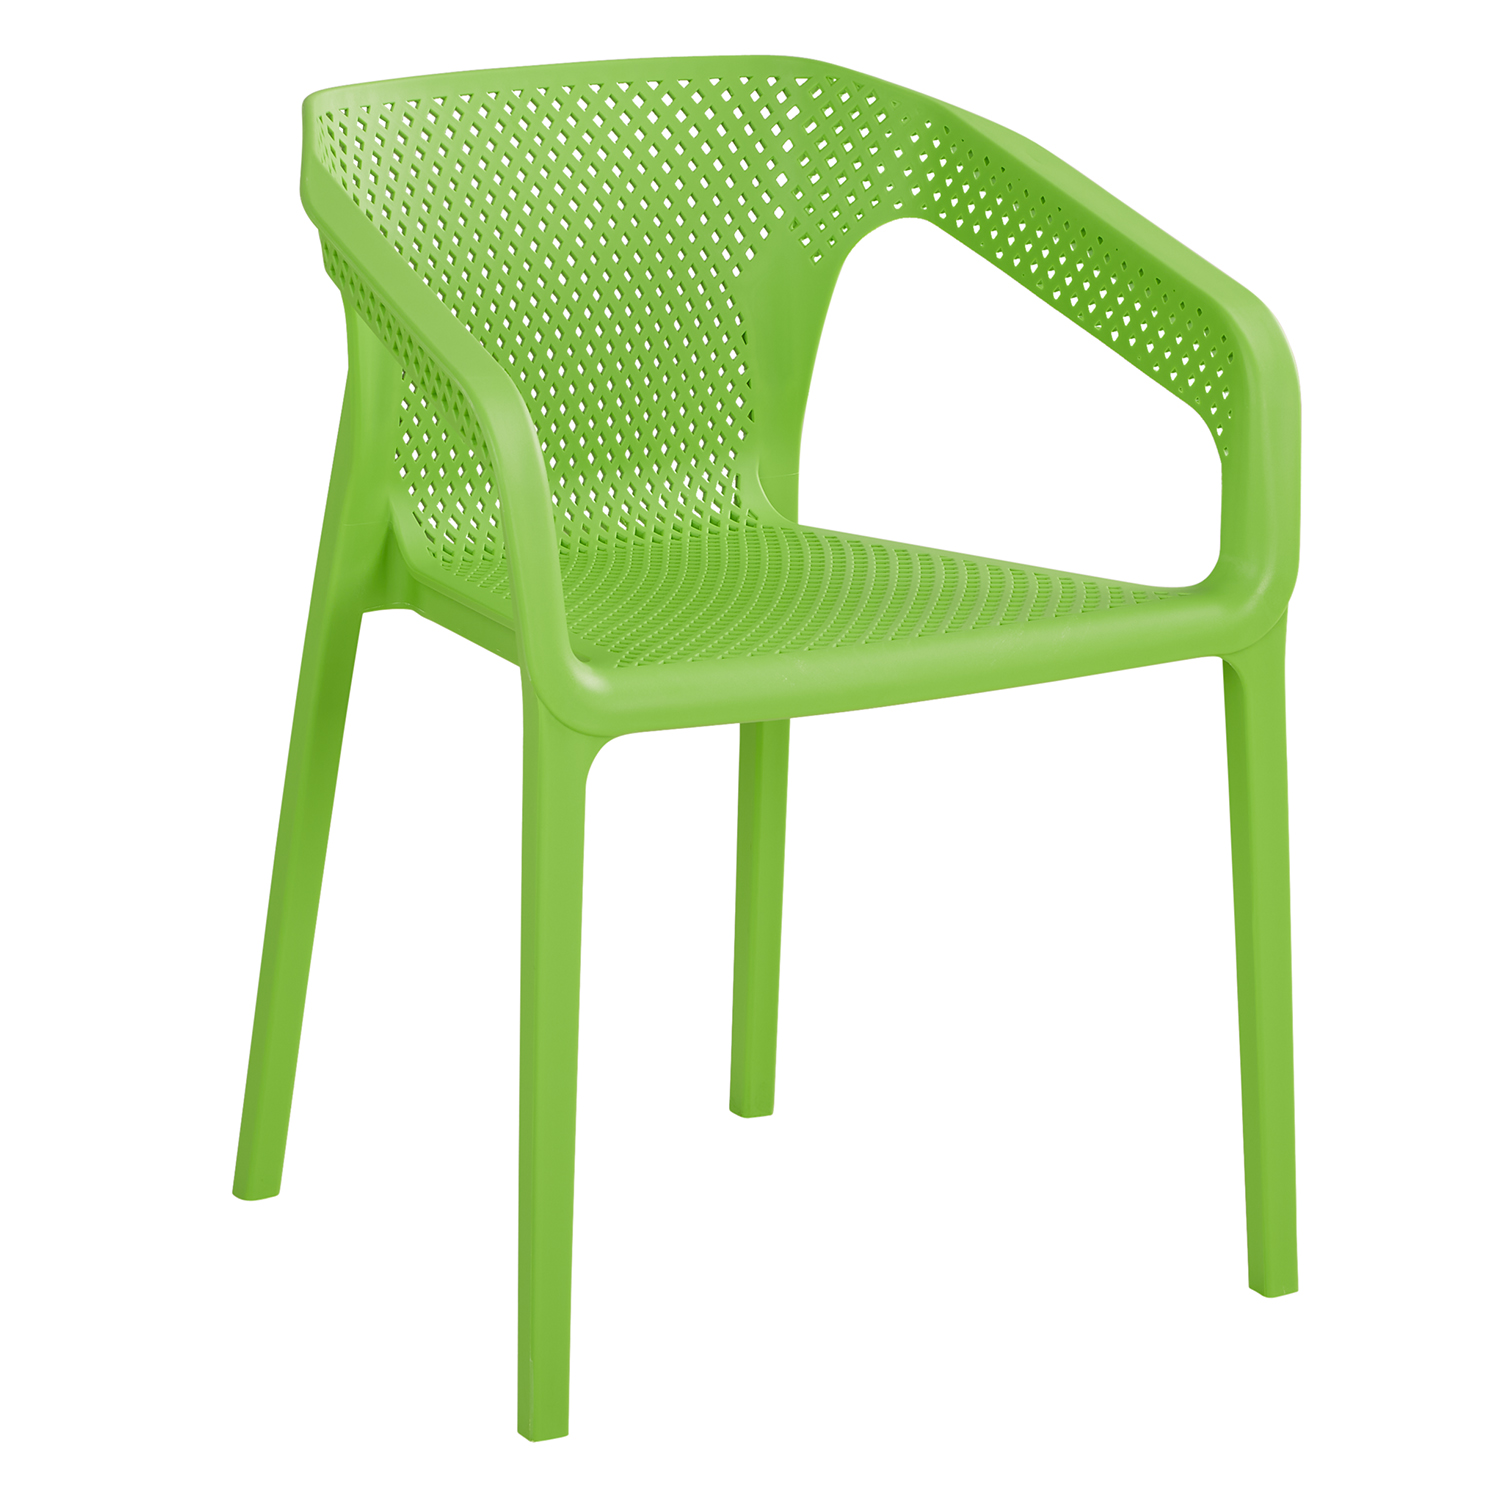 Set of 6 Garden chair with armrests Camping chairs Green Outdoor chairs Plastic Egg chair Lounger chairs Stacking chairs